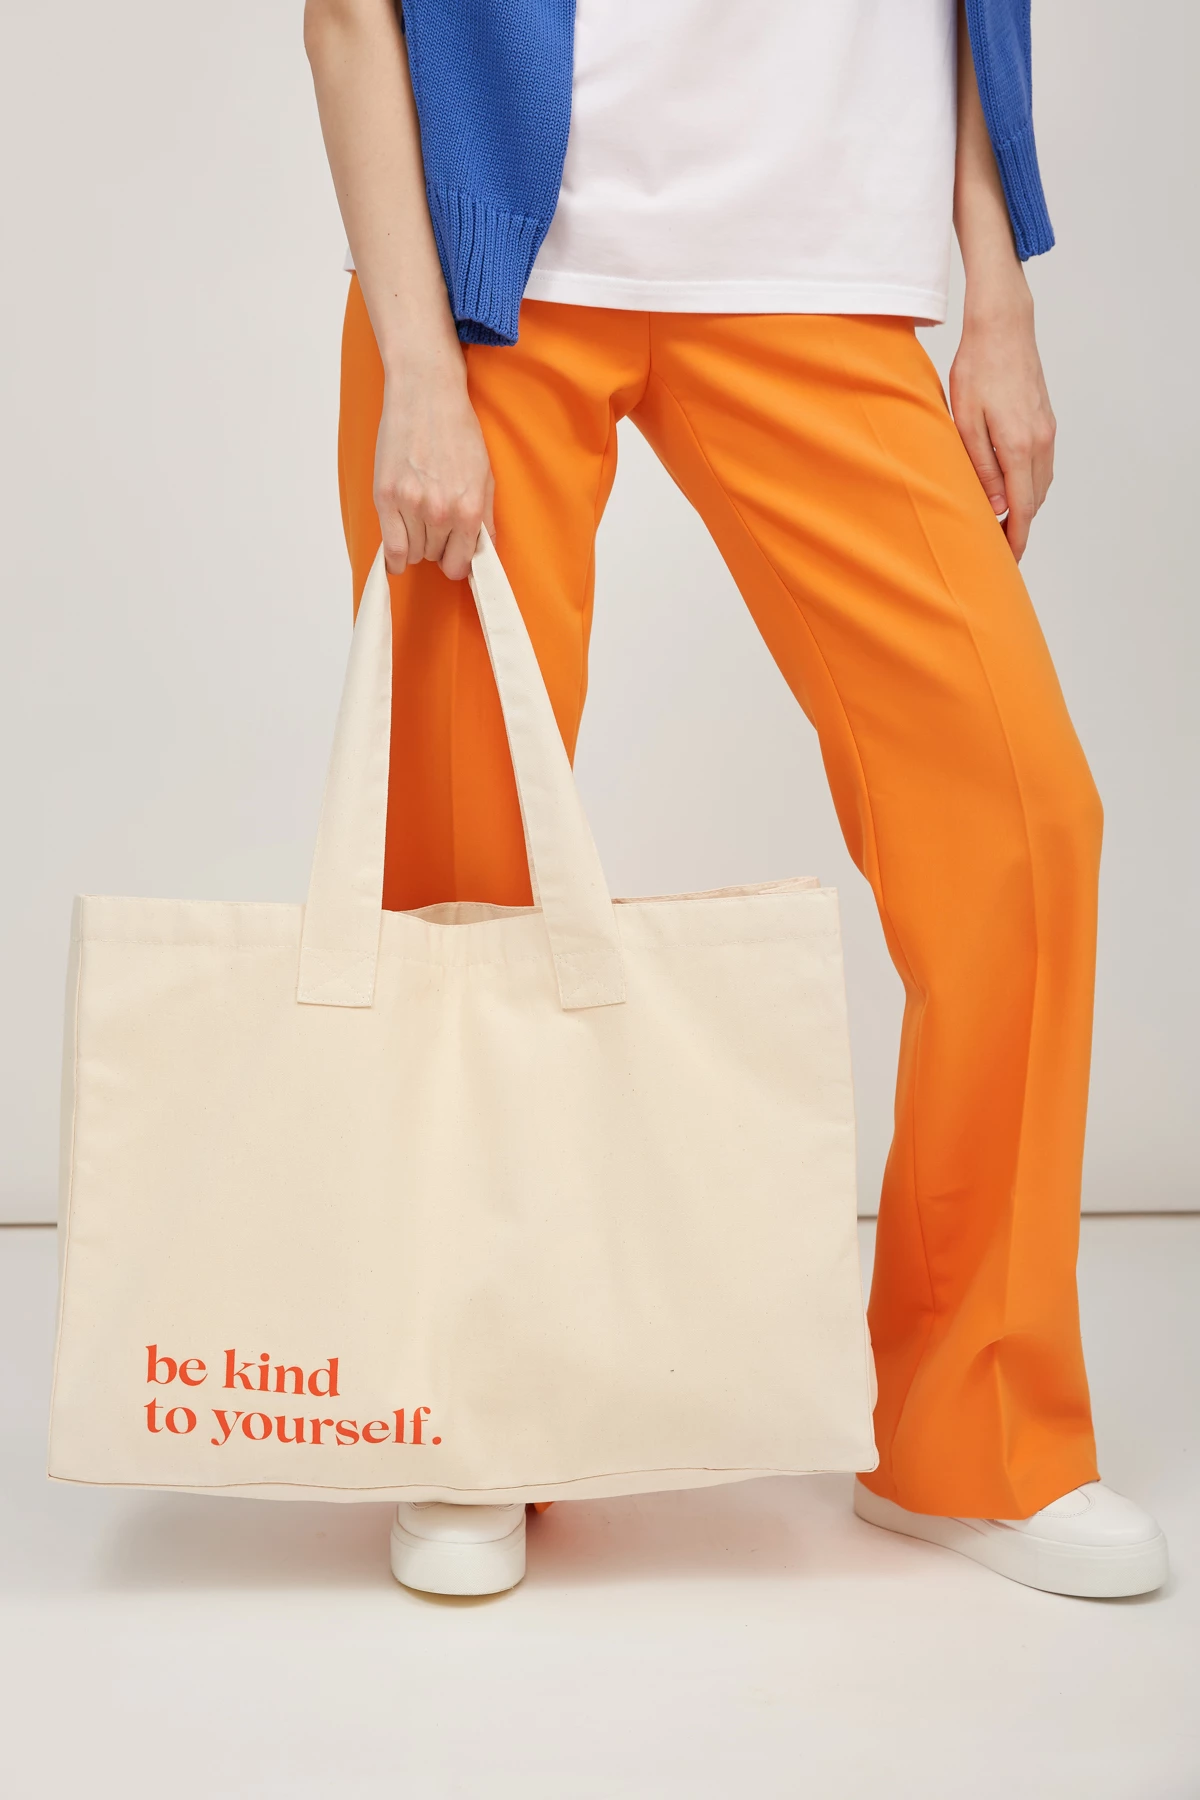 Tote bag with "be kind to yourself" print, photo 3